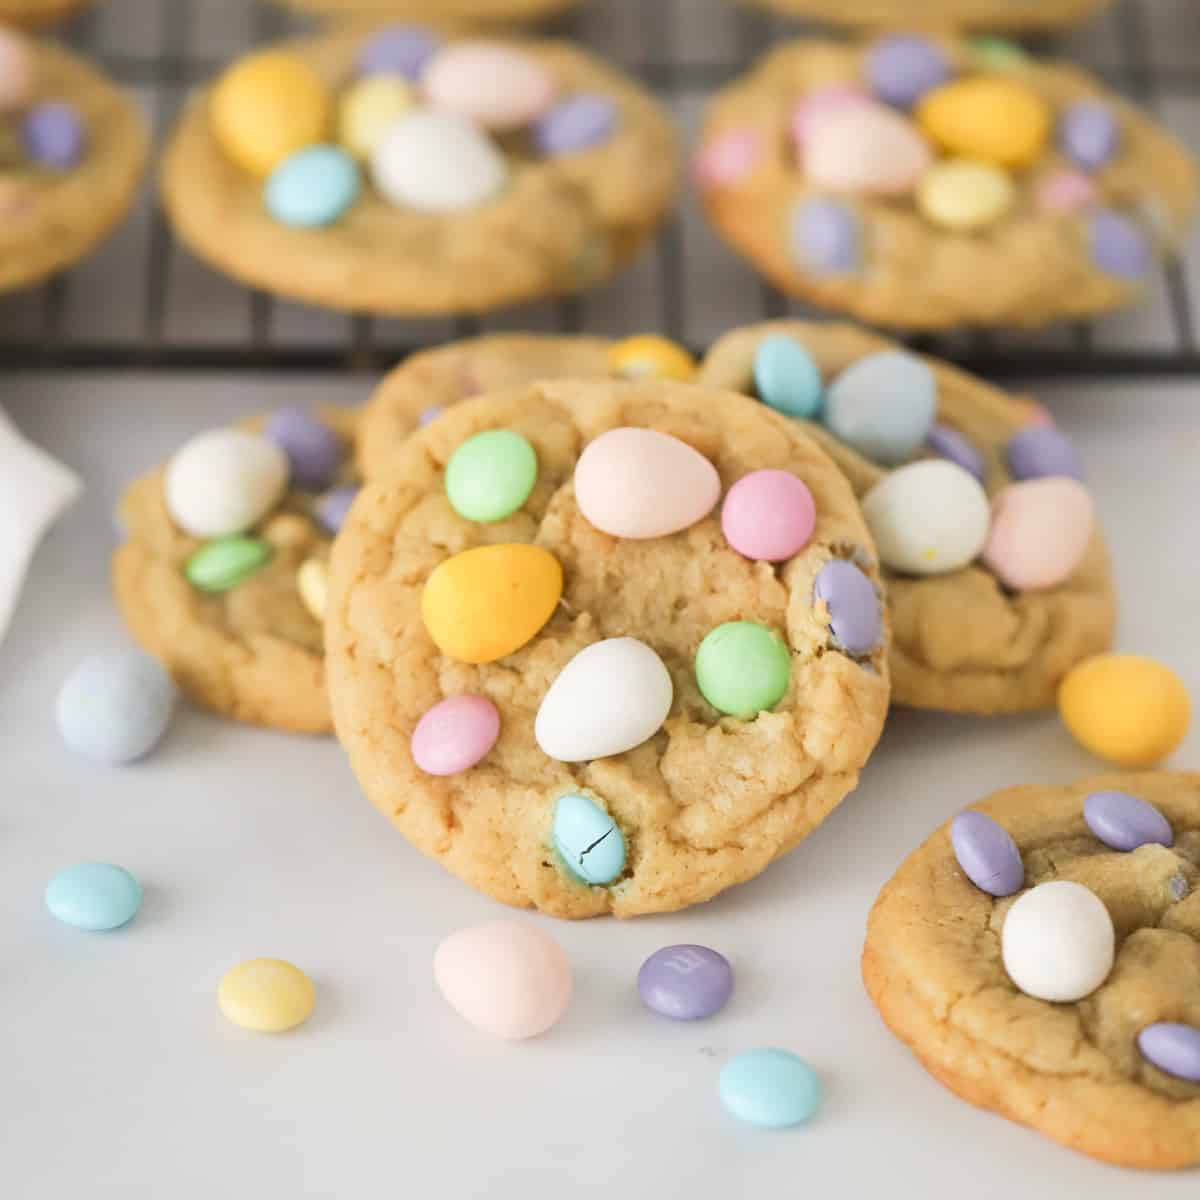 easy cadbury cookies with m and m's and cadbury eggs, mini egg easter eggs cookies